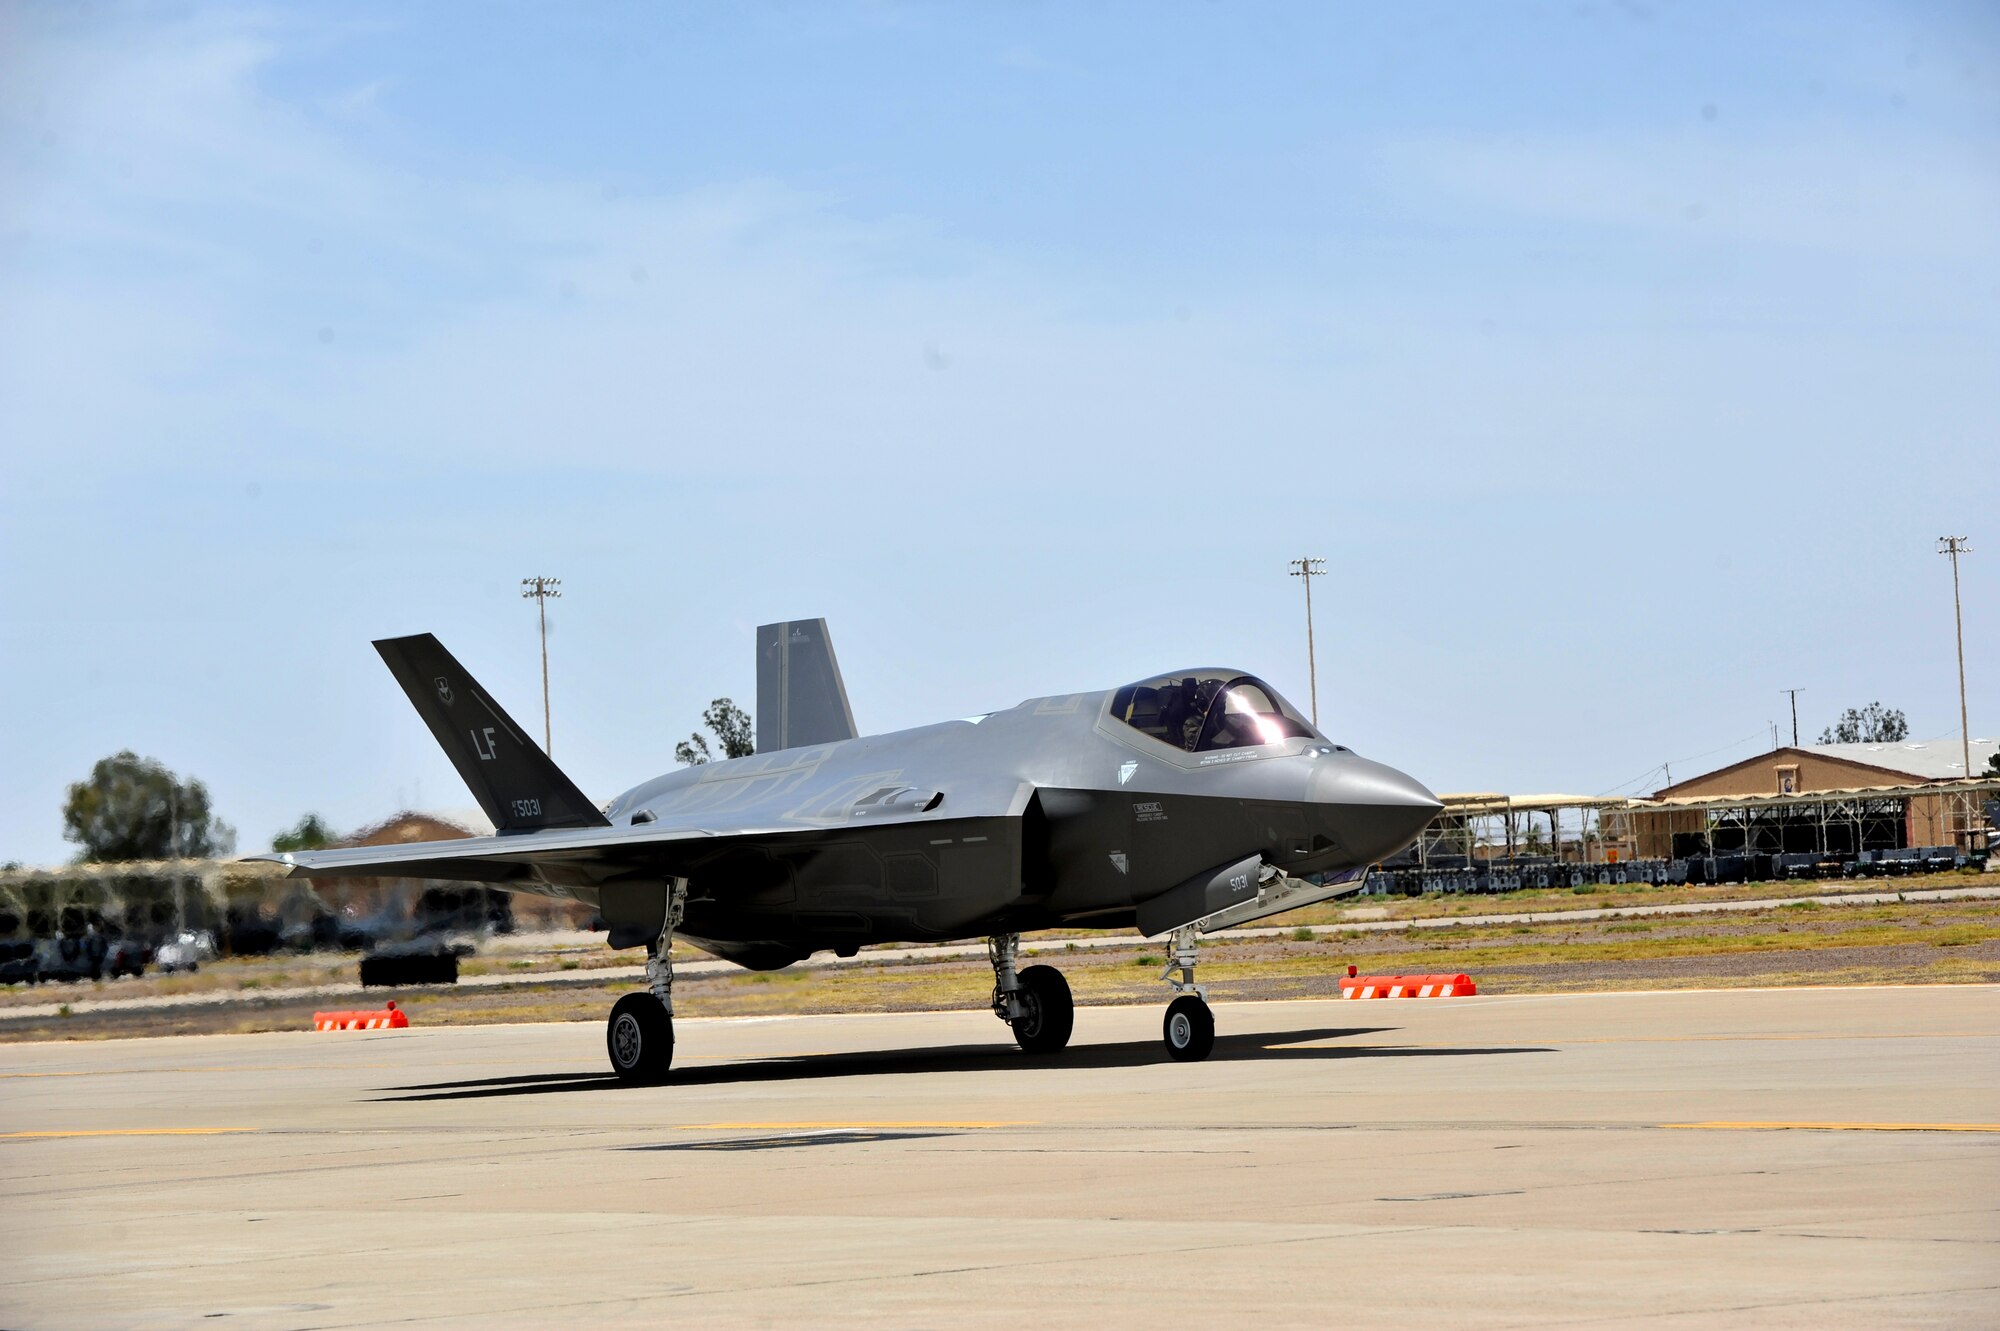 An F-35 Lightning II assigned to Luke Air Force Base prepares to launch May 6, 2014  during one of its first flights at the base. The jet took flight in its first sortie at Luke on May 5, 2014. (U.S. Air Force photo by Senior Airman Jason Colbert)